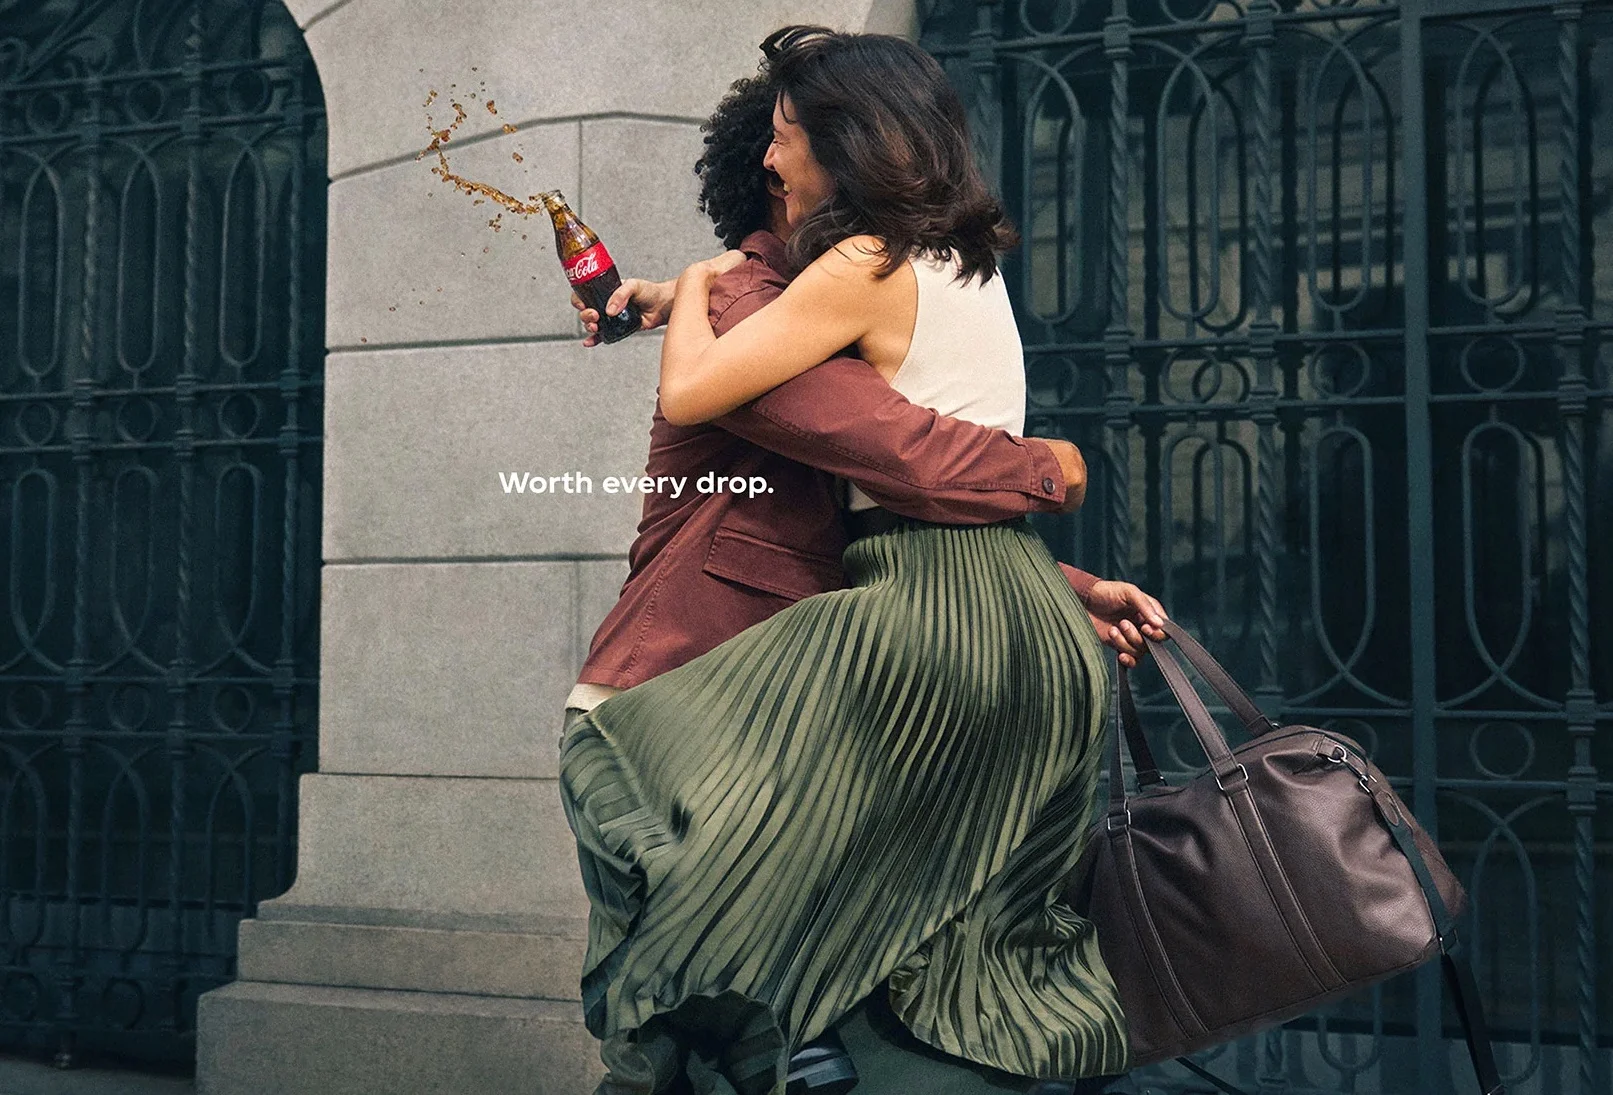 Woman hugging man while accidentally spilling Coca-Cola with tagline "Worth every drop" against ornate gate background.